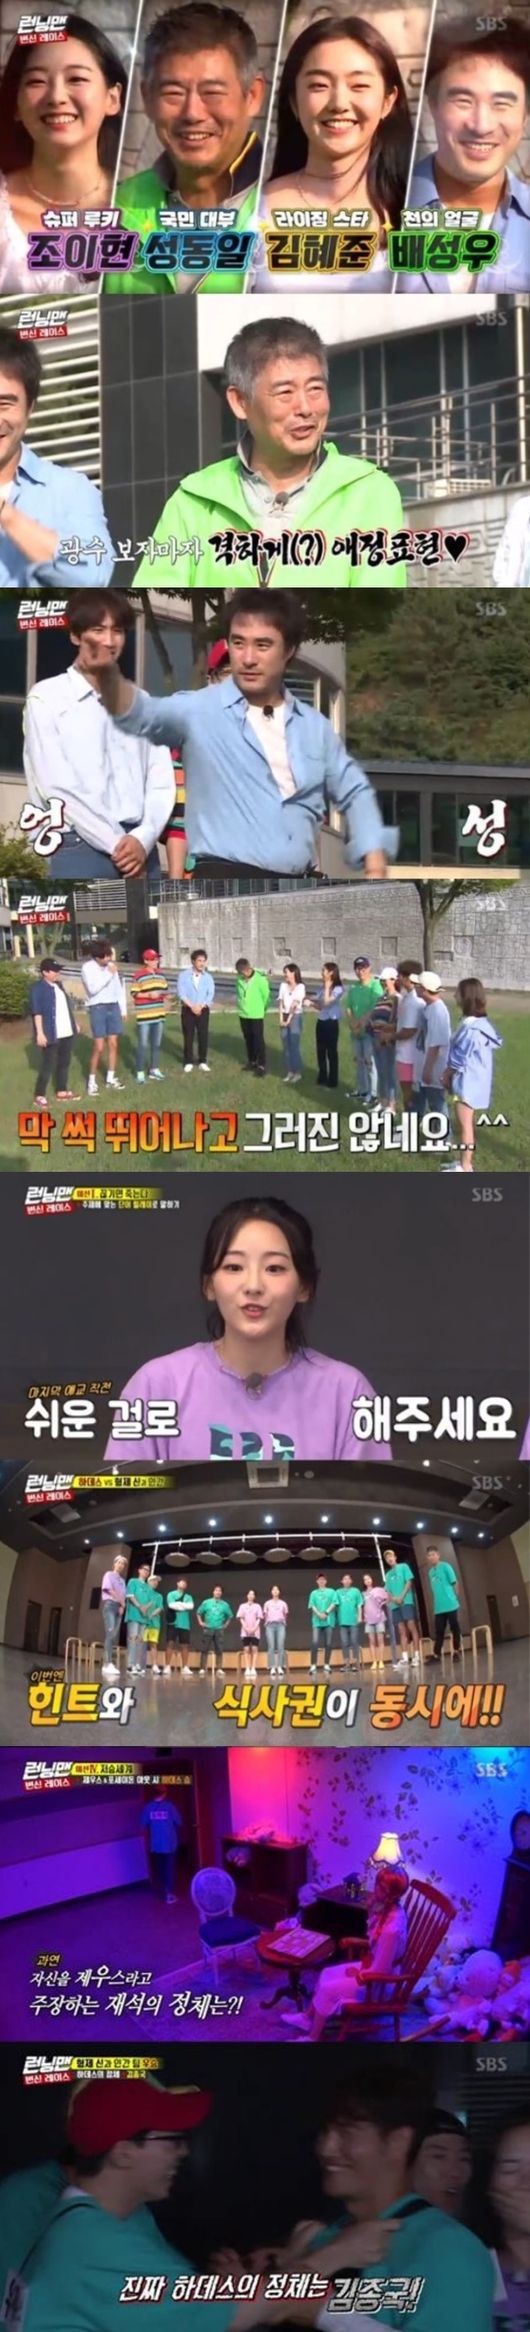 SBS Running Man took the top spot in the same time zone of 2049 target audience rating with a big gap.According to Nielsen Korea, the ratings agency, Running Man, which aired on the 11th, soared to 8.4% of the highest audience rating per minute, and the 2049 target audience rating, an important indicator of major advertising officials, recorded 3.7% (based on the second part of the audience rating of households in the metropolitan area), beating all Masked Wang and Donkey Ears.The show was accompanied by actor Sung Dong-il, Bae Seong-woo, Jo Yi-hyun and Kim Hye-joon of the movie Transform.The members challenged various missions to find Hades, Zeus, and Poseidon gods, and the chewy race that led to doubting each other until the end was exciting.Along with this, the performance of the guests also shone.Sung Dong-il, like Lee Kwang-soos natural enemy, tightened Lee Kwang-soos breath and made a penalty, while Bae Seong-woo laughed with the charm of introducing a clumsy ballet.The final mission was decorated with the horror special The Underworld Race.In order for the brothers and men to win the championship, they have to make Hades in-N-Out Burger, and if Hades makes Zeus and Poseidon in In-N-Out Burger, Hades will win alone.The members gathered hints at the appearance of ghosts in the race, and Yoo Jae-Suk and Kim Jong-kook were selected as candidates for Hades.In the meantime, Yoo Jae-Suk put Kim Jong-kooks name tag on the Hades chair that Lee Kwang-soo found, and finally Hades was revealed as Kim Jong-kook.The scene recorded the highest audience rating of 8.4% per minute, accounting for the best one minute.running man